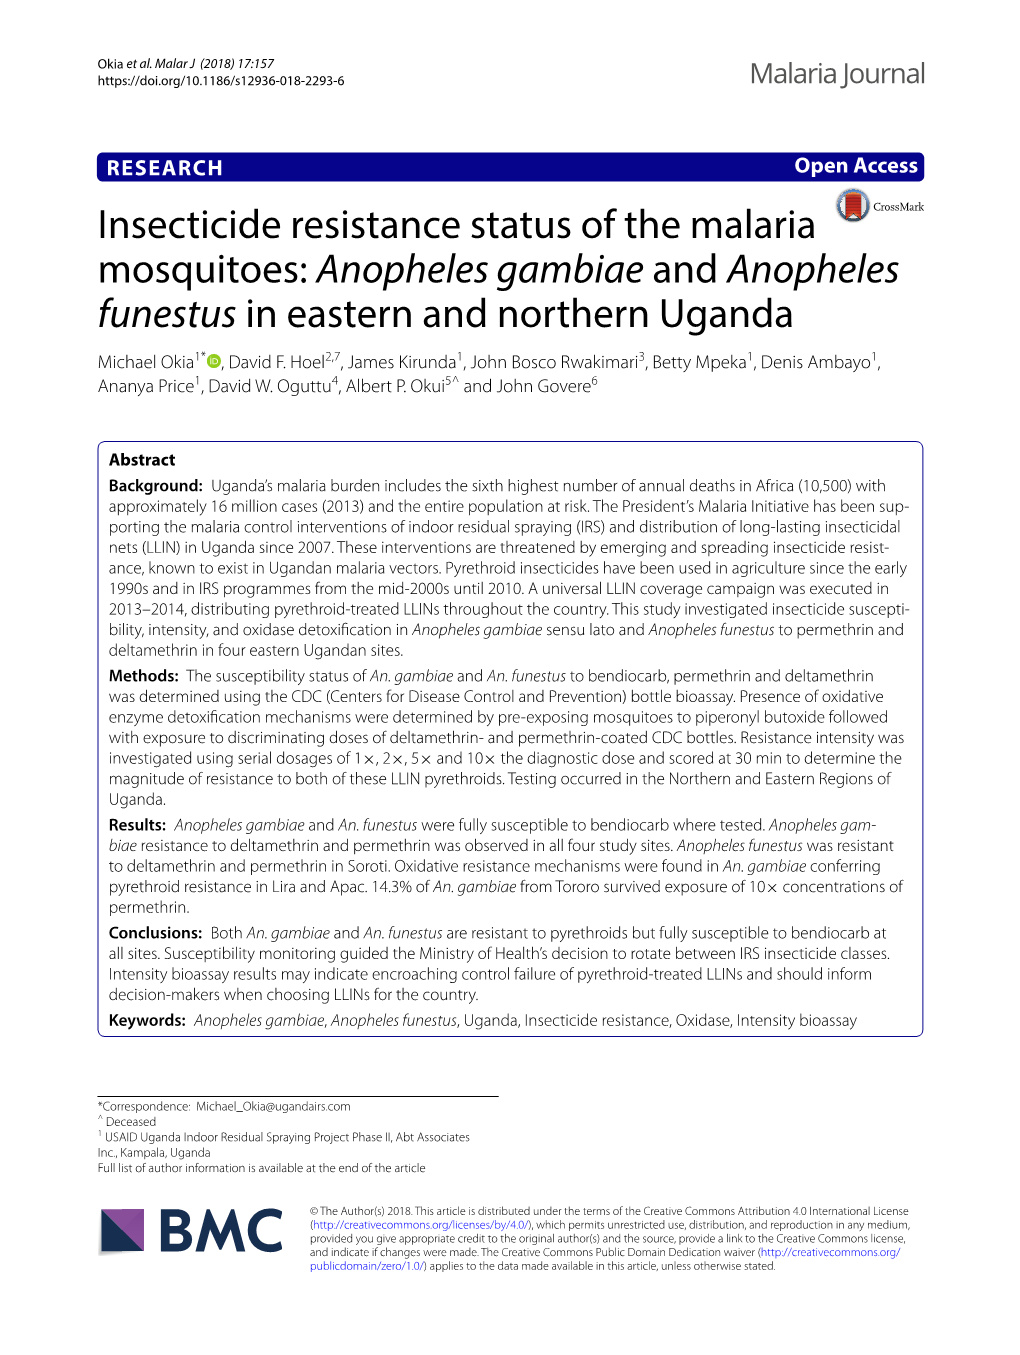 Insecticide Resistance Status of the Malaria Mosquitoes: Anopheles Gambiae and Anopheles Funestus in Eastern and Northern Uganda Michael Okia1* , David F